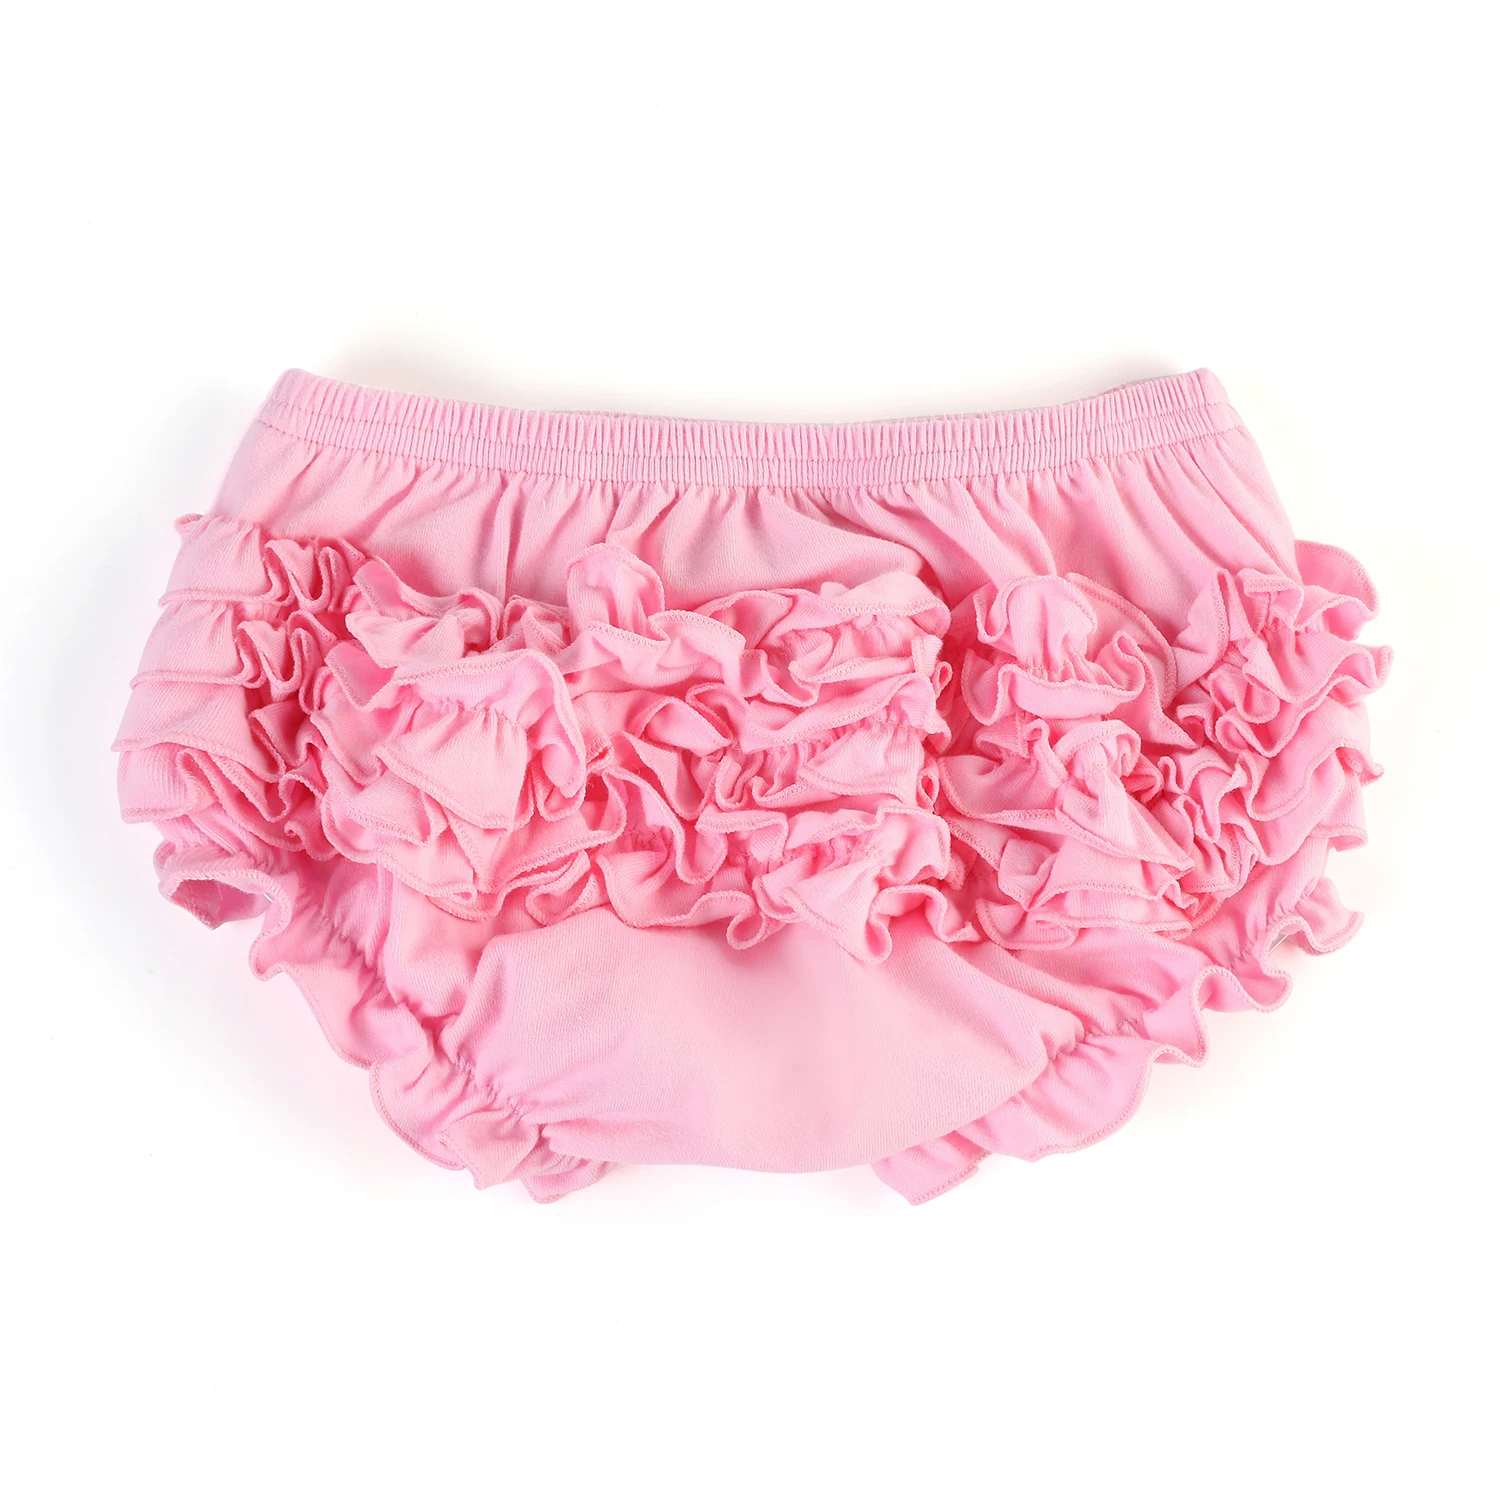 

Multicolor Baby Ruffles Bloomer Infant Shorts Diaper Cover Baby Girls Ruffles Lace 95% Cotton Newborn Bloomers